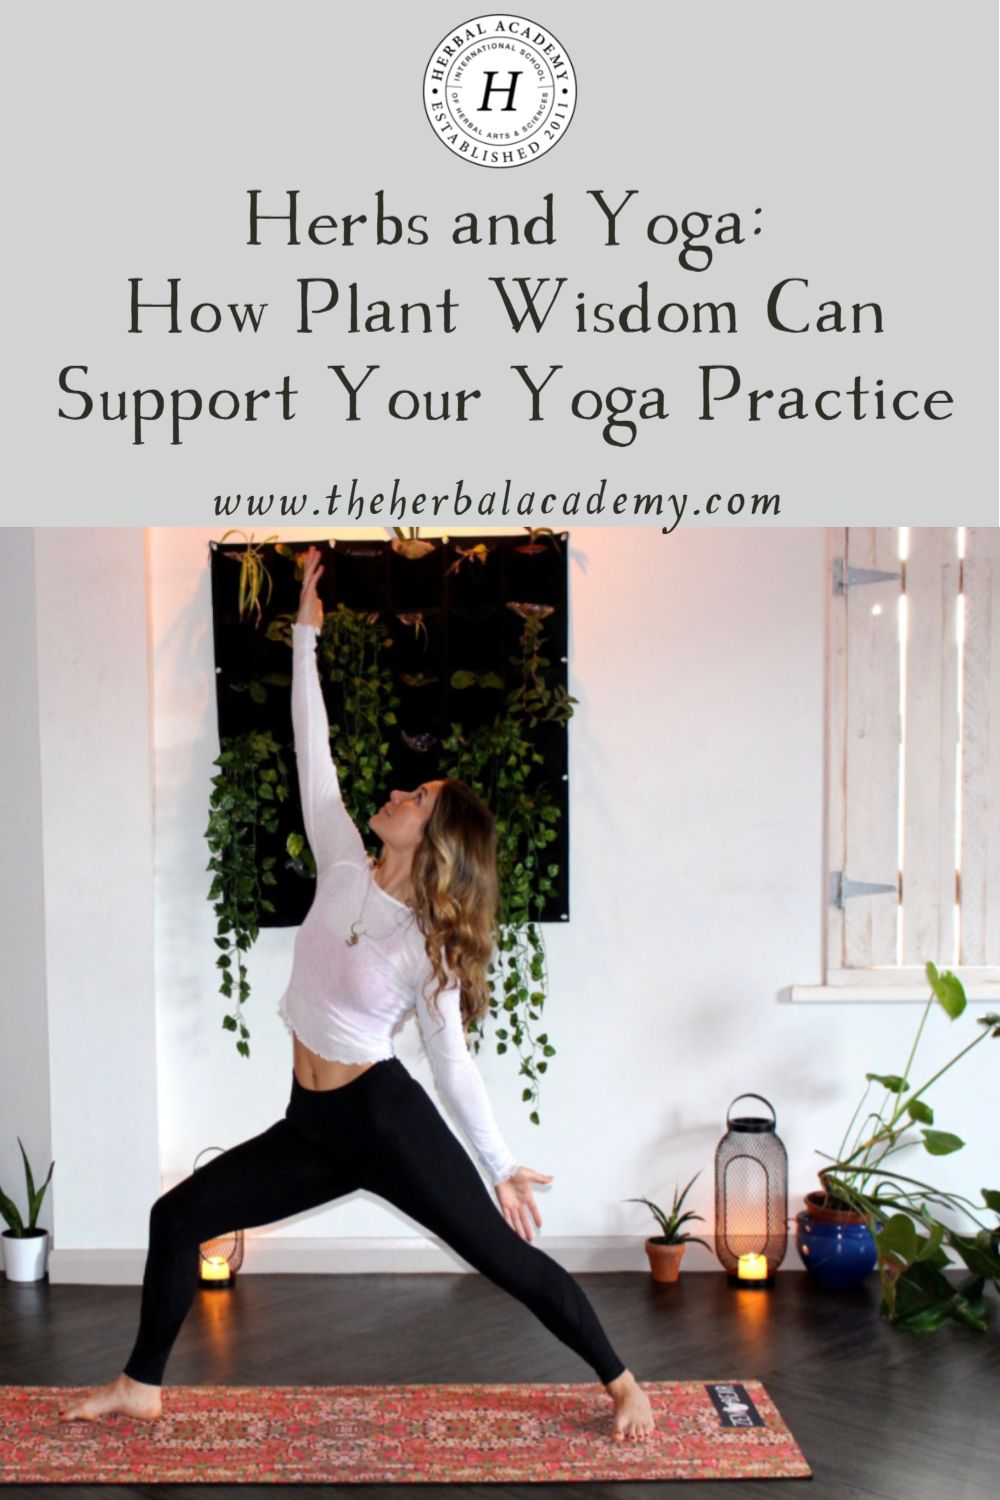 Herbs and Yoga: How Plant Wisdom Can Support Your Yoga Practice | Herbal Academy | Herbs can support balance, helping to quiet distractions and giving us the strength to engage deeper in our yoga practice.